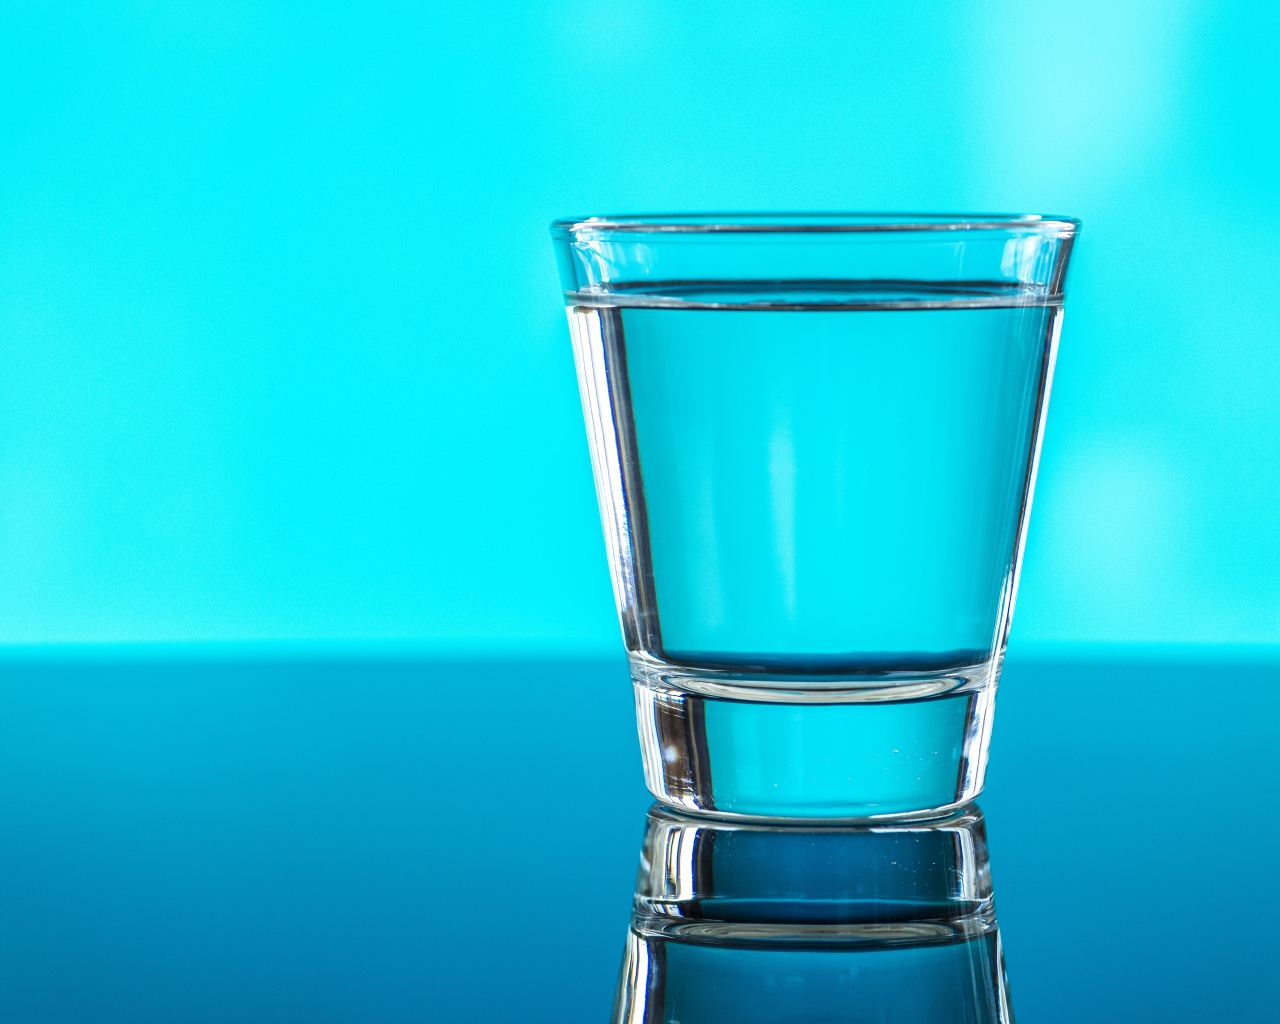 A glass of water on a blue background